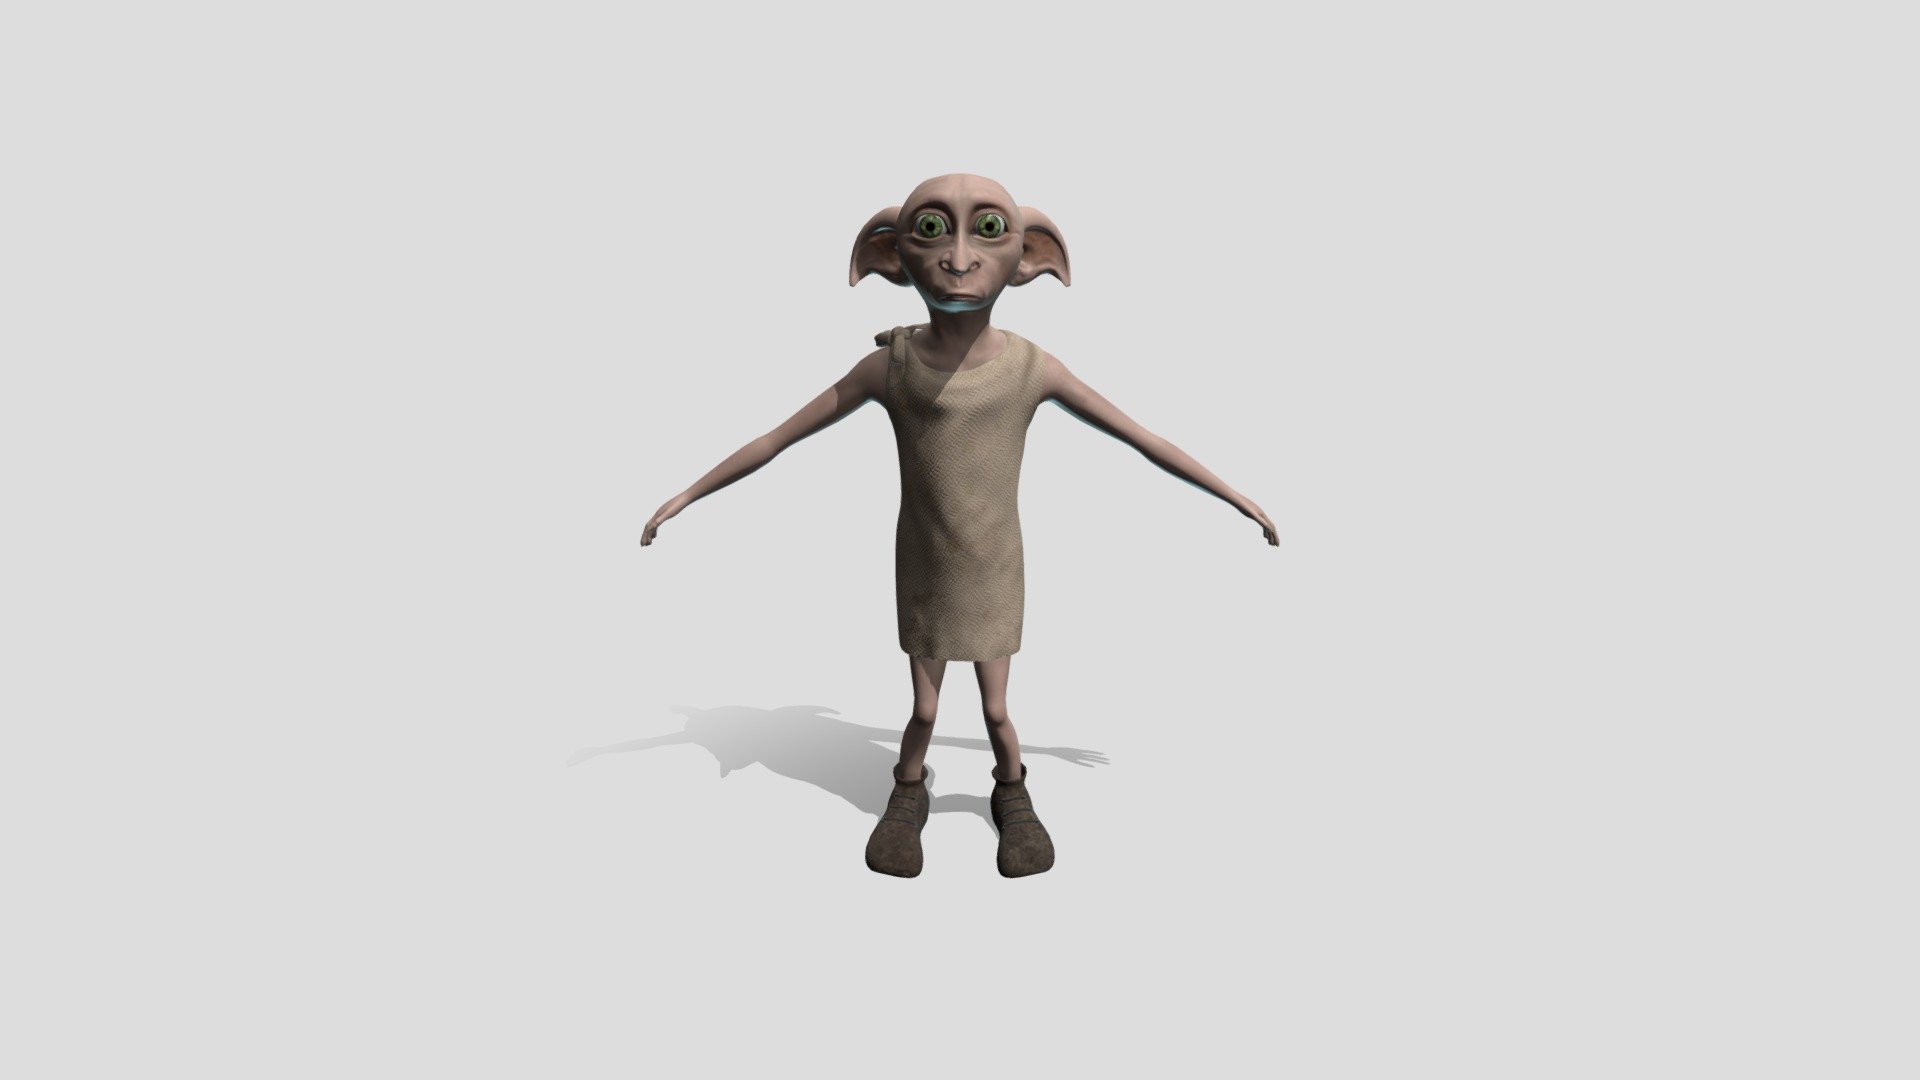 Dobby the free house elf. Character from the Harry Potter series.
This is a side project I have been working on to practice character modelling and baking whilst on a break from uni! - Dobby the Free House Elf - Harry Potter - Download Free 3D model by ChloeRobynSmith (@chloerobyn) 3d model